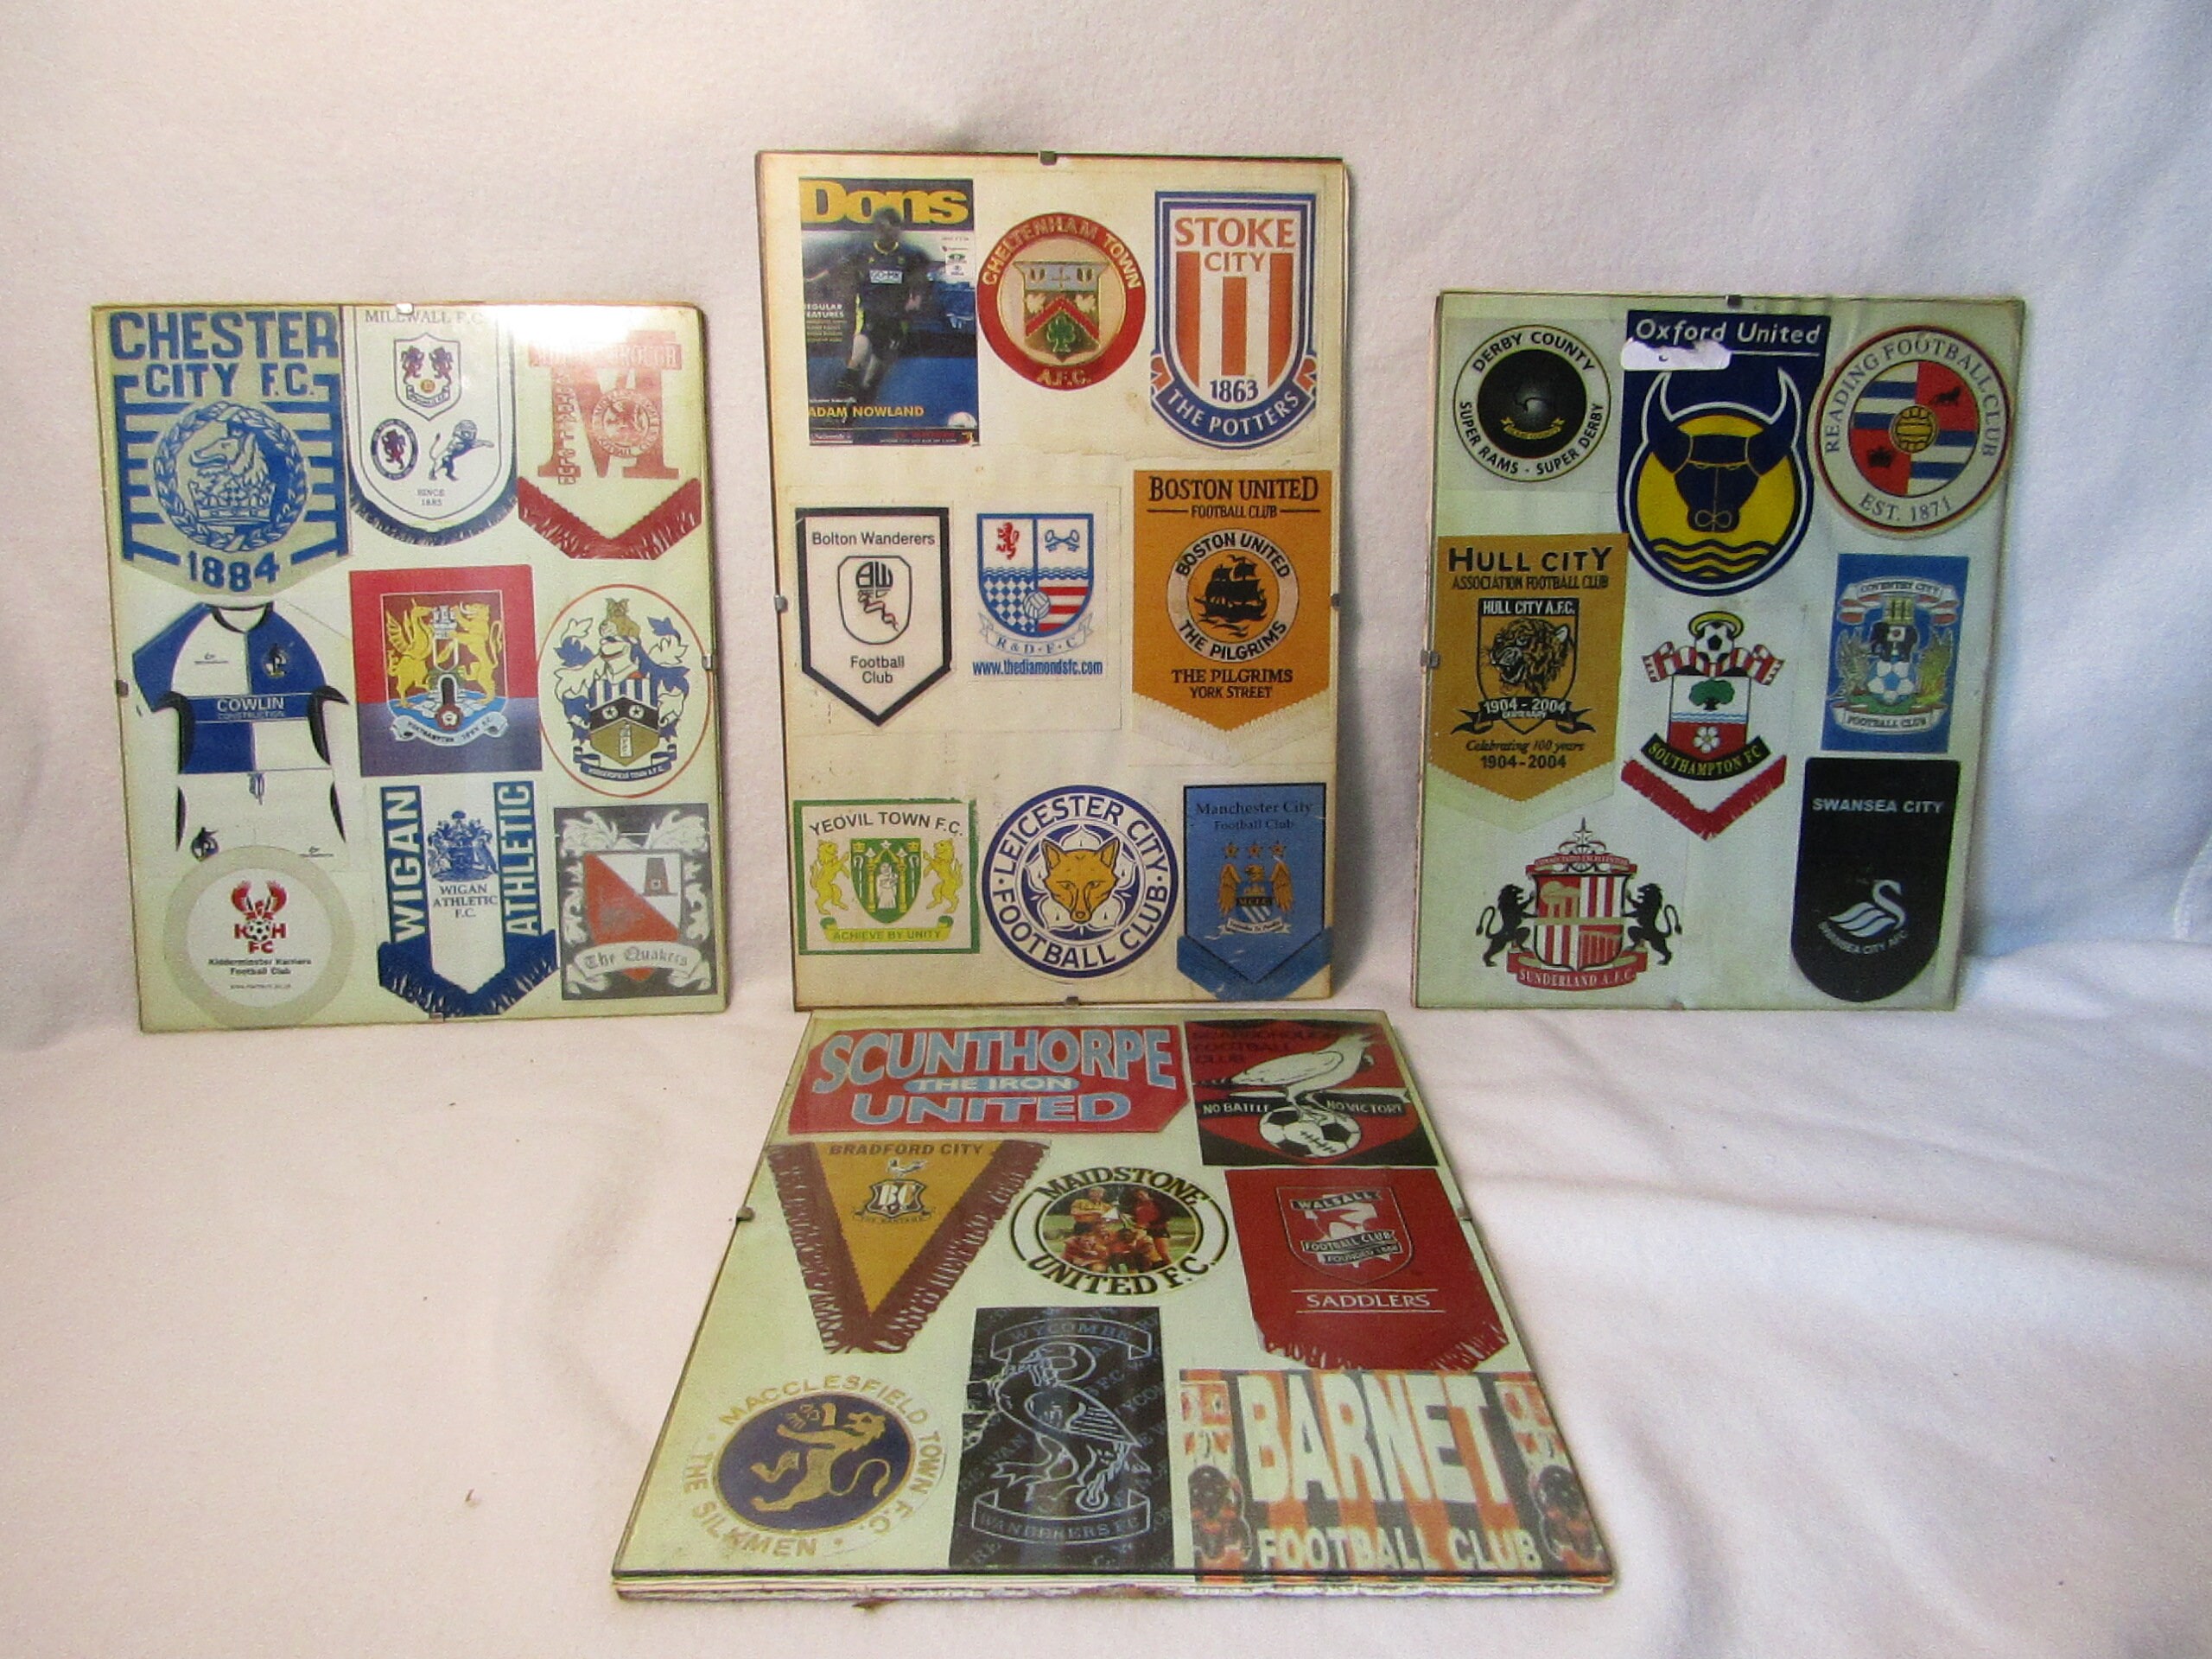 Vintage Soccer Patches – Put This On